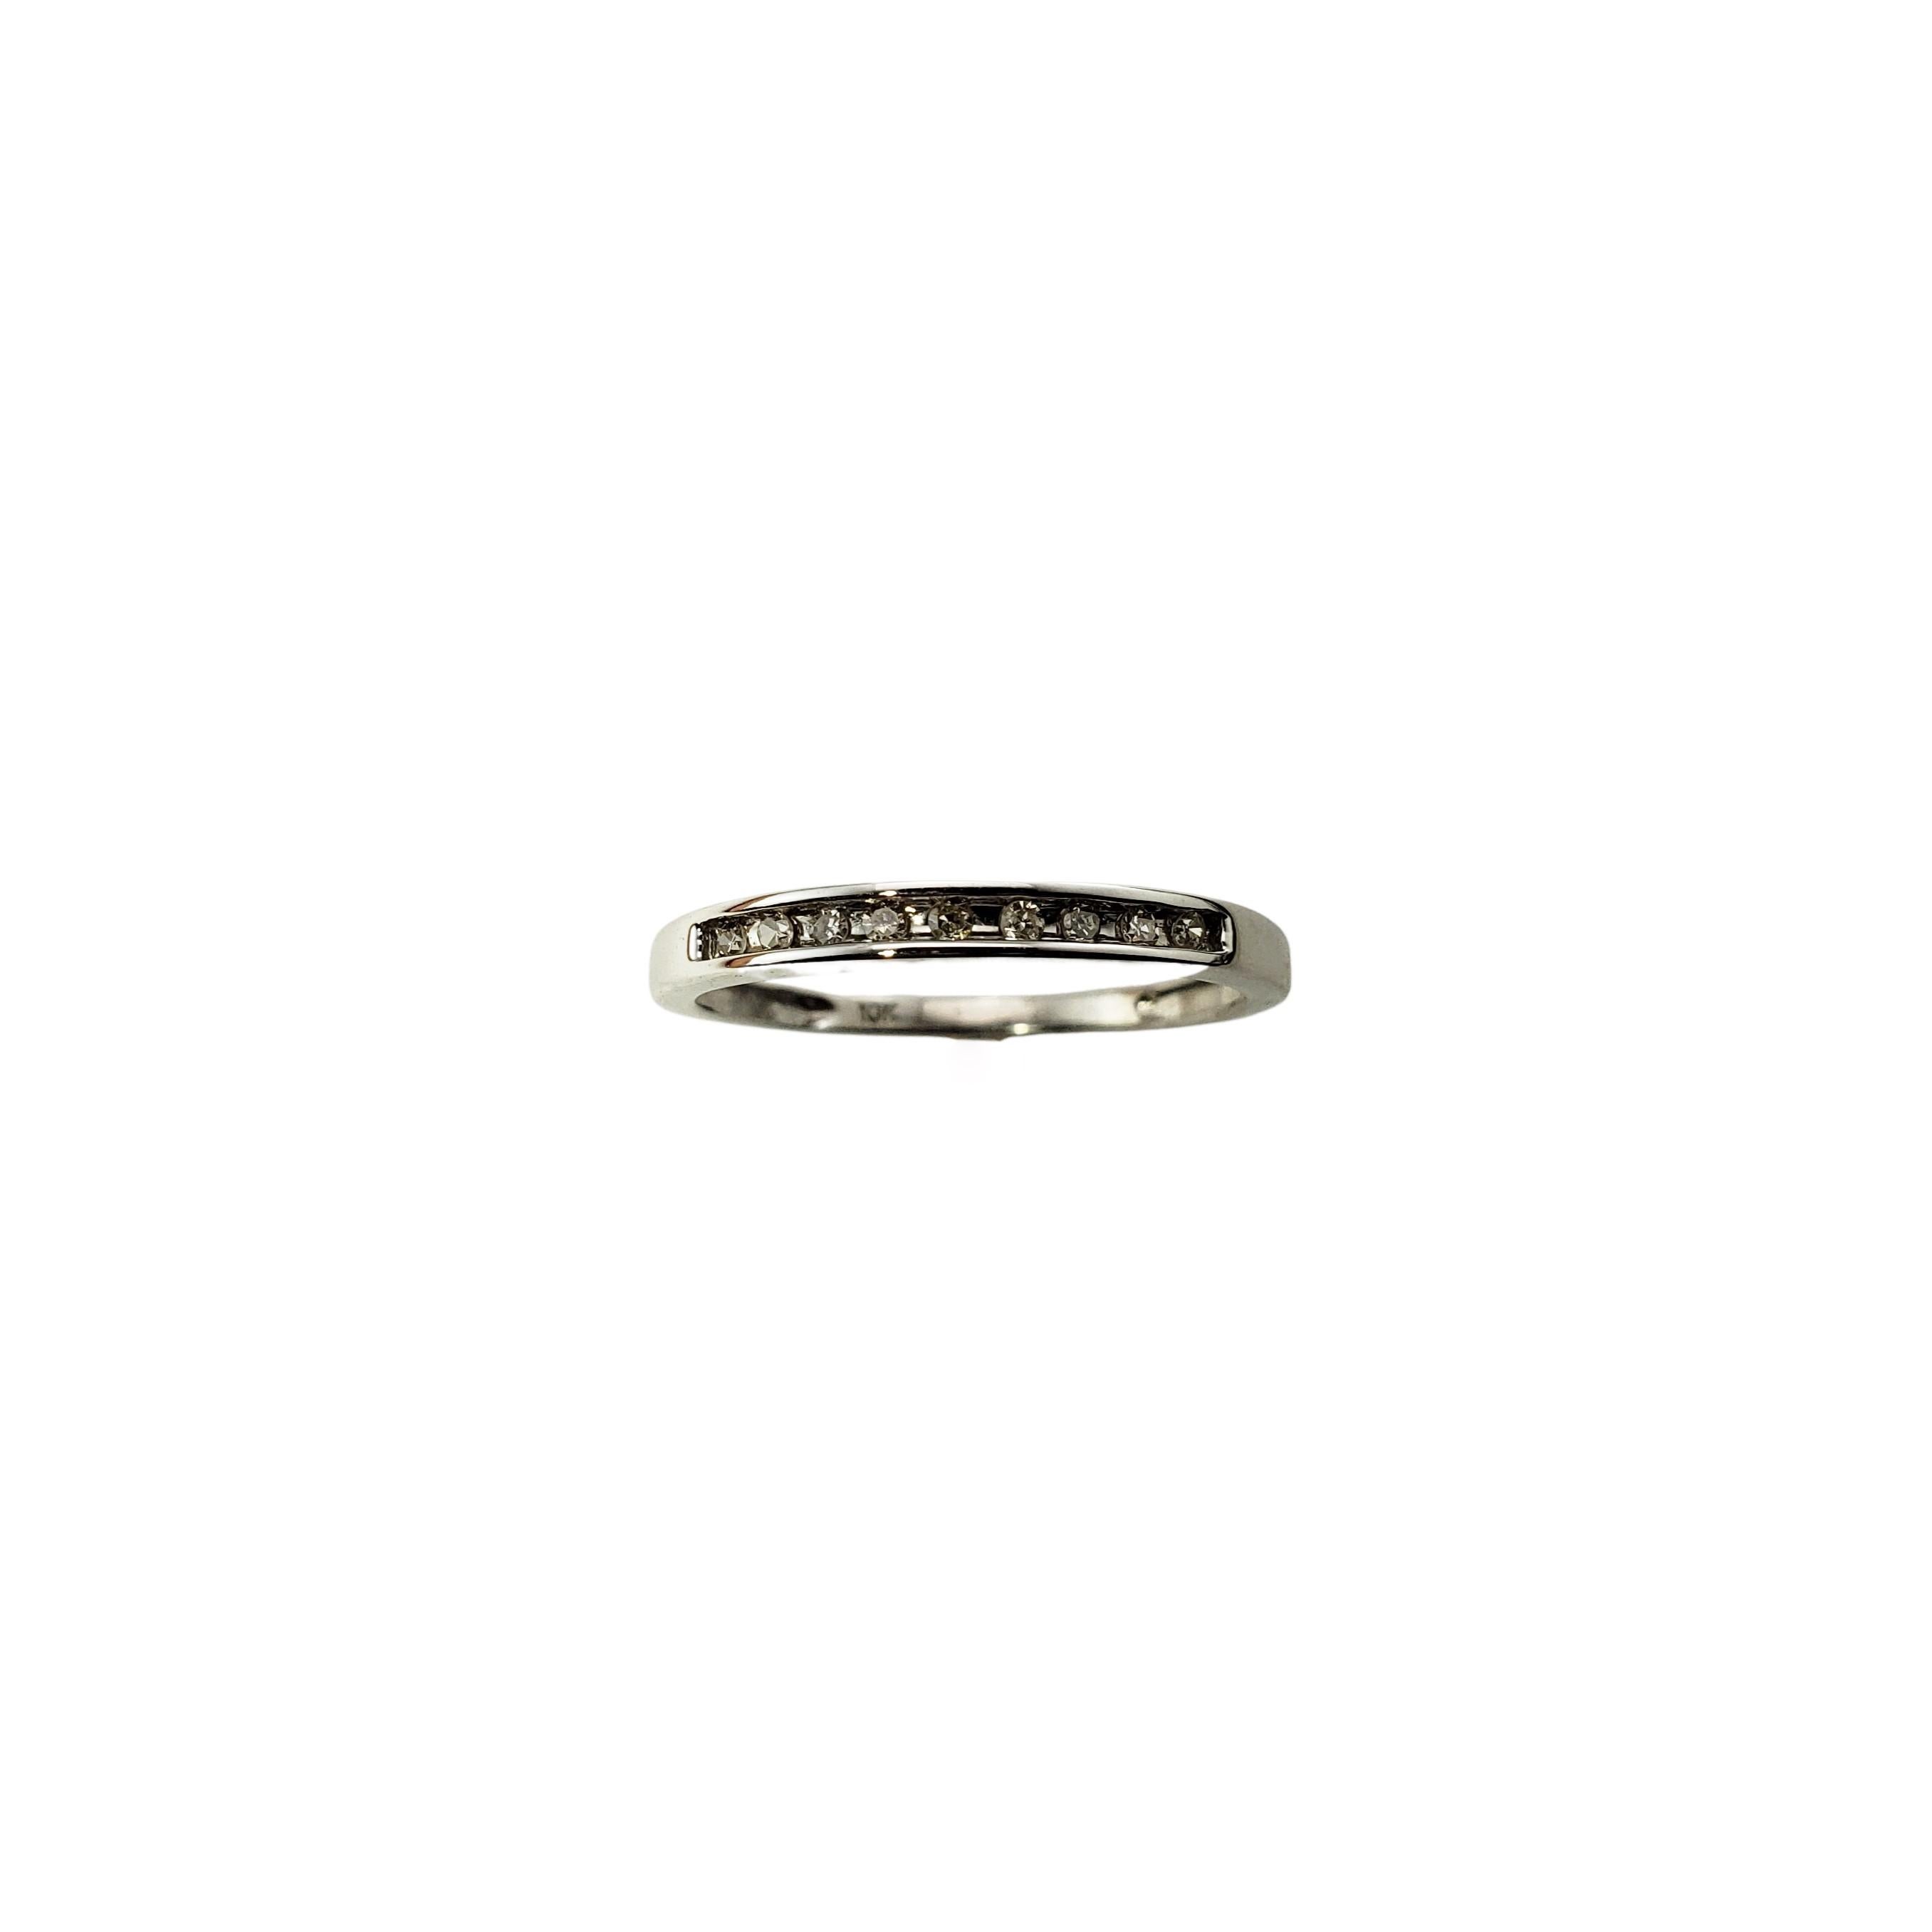 10 Karat White Gold and Diamond Wedding Band Ring Size 8-

This sparkling band features nine round single cut diamonds set in classic 10K white gold.  Width:  3 mm.  Shank:  2 mm.

Approximate total diamond weight:  .09 ct.

Diamond color: